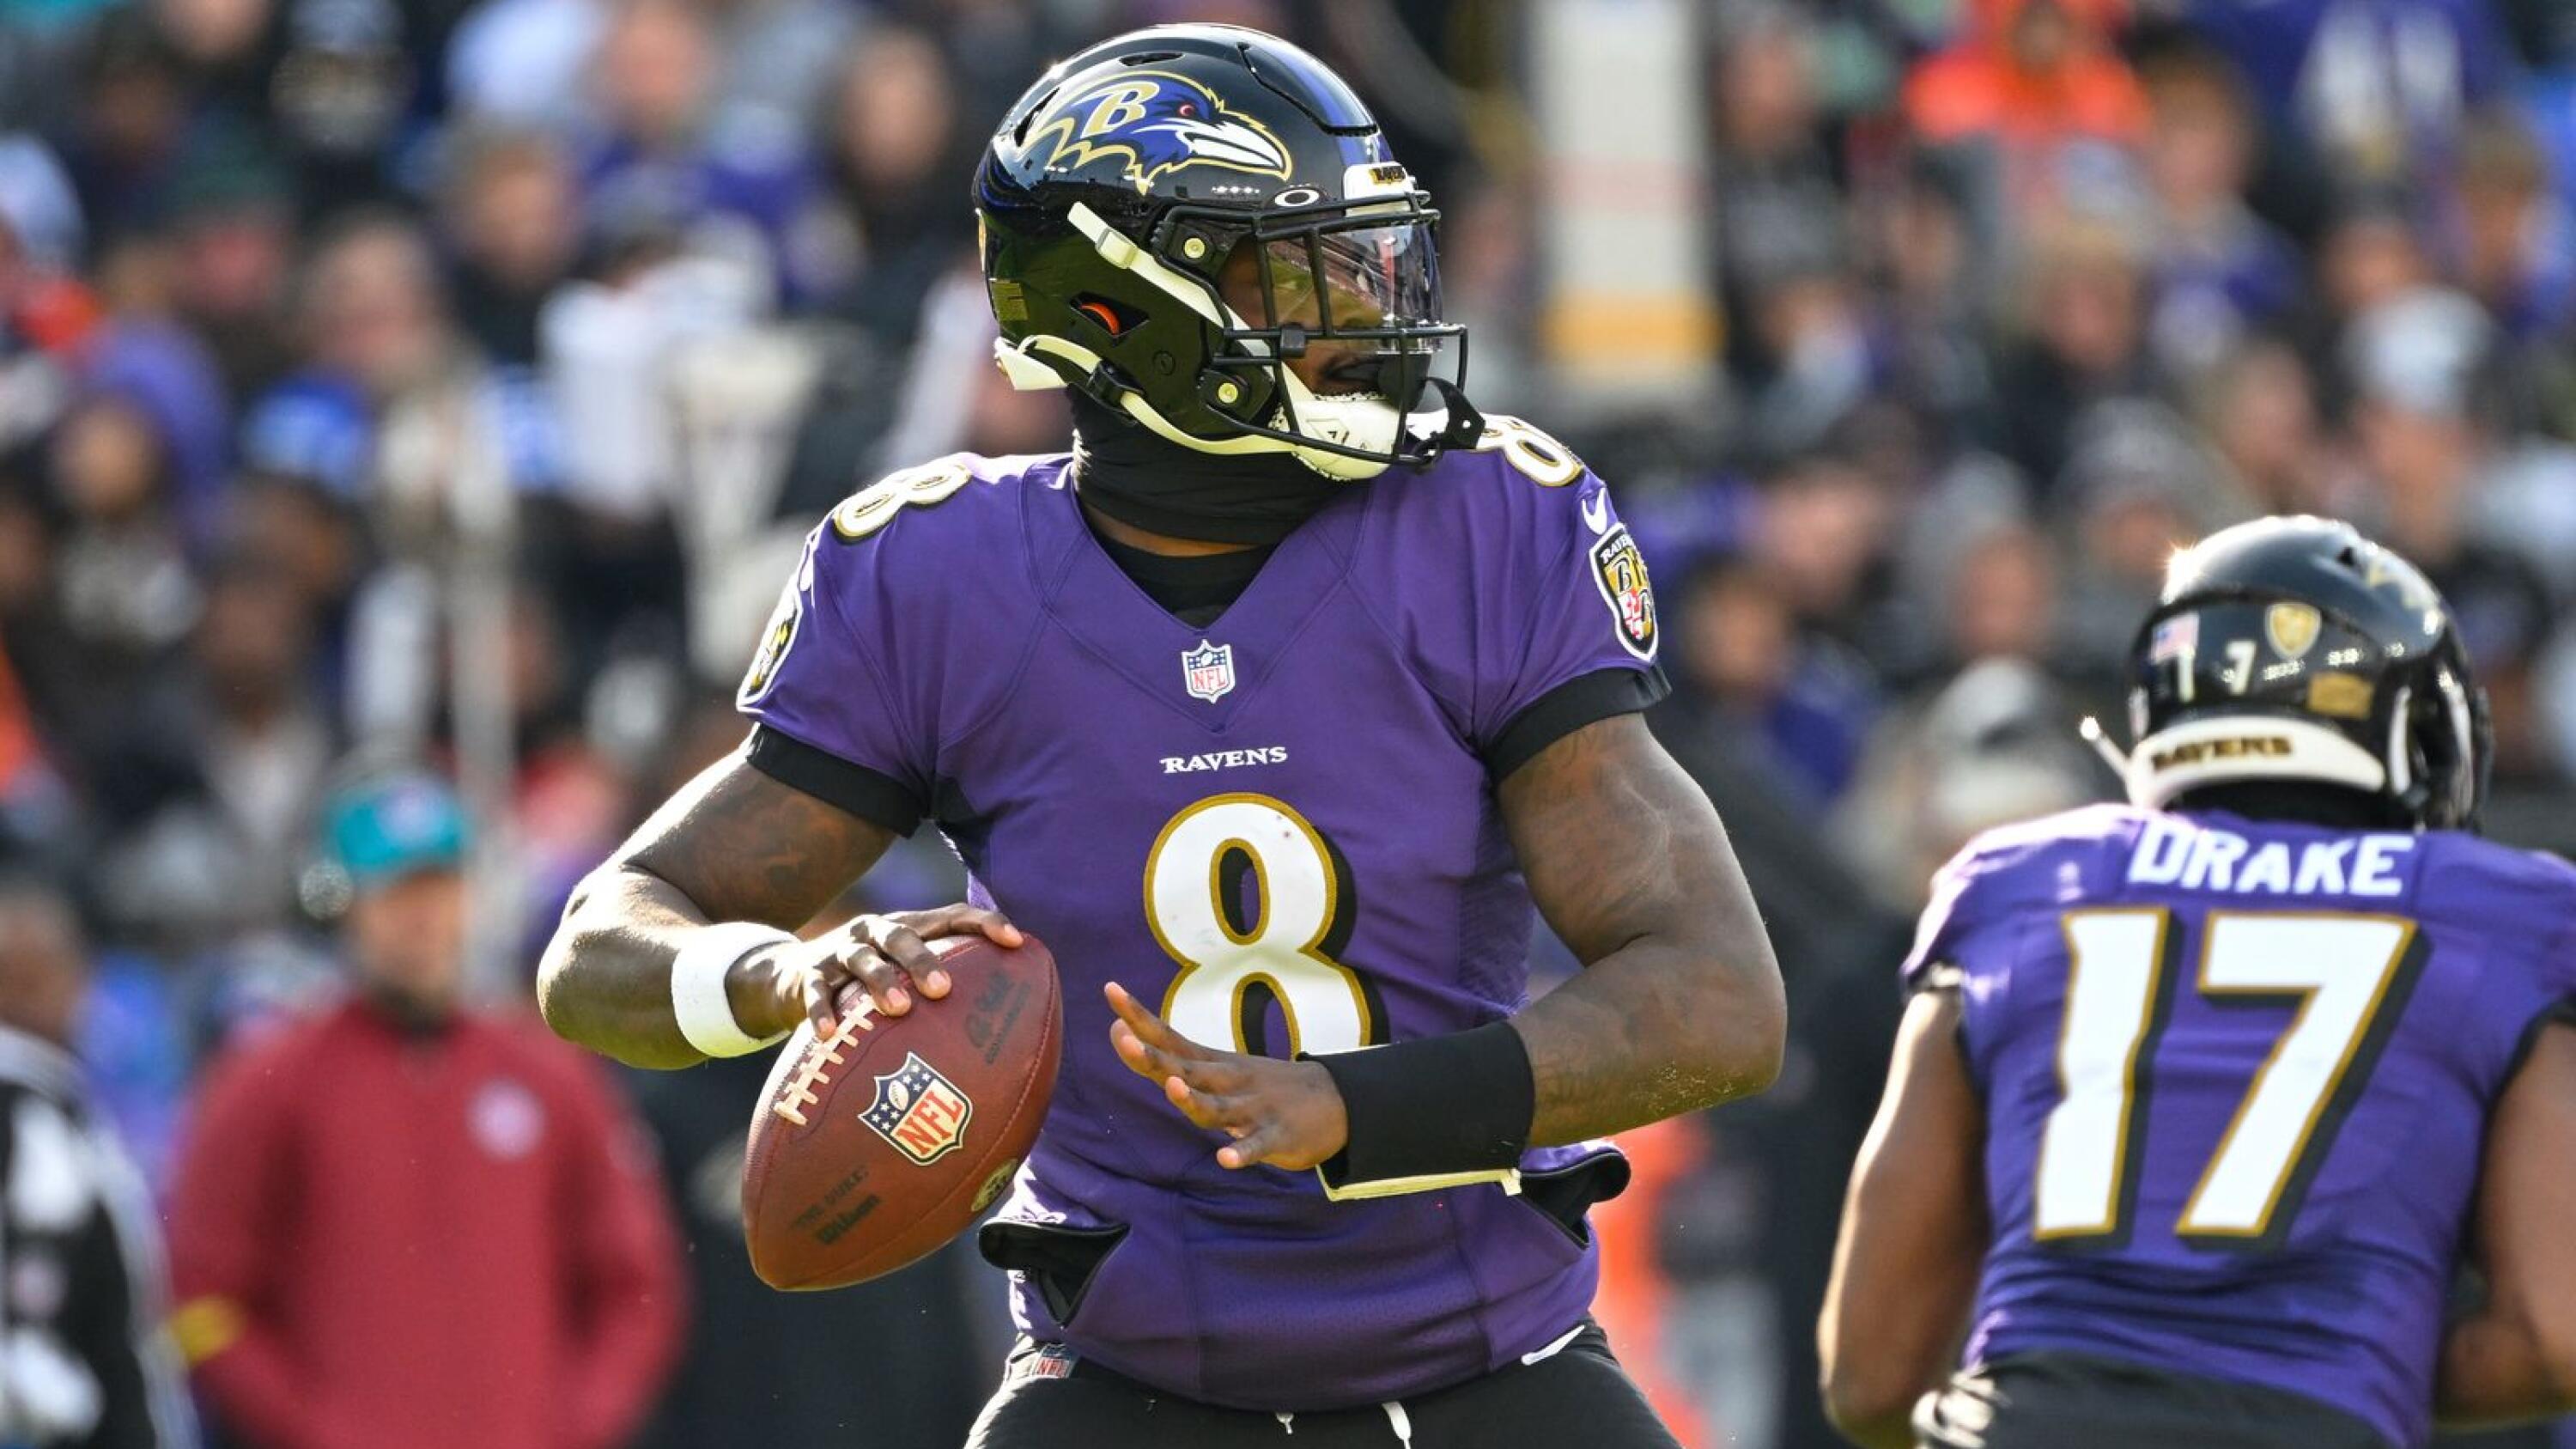 Ravens' Lamar Jackson plans to switch to No. 1 jersey, but only